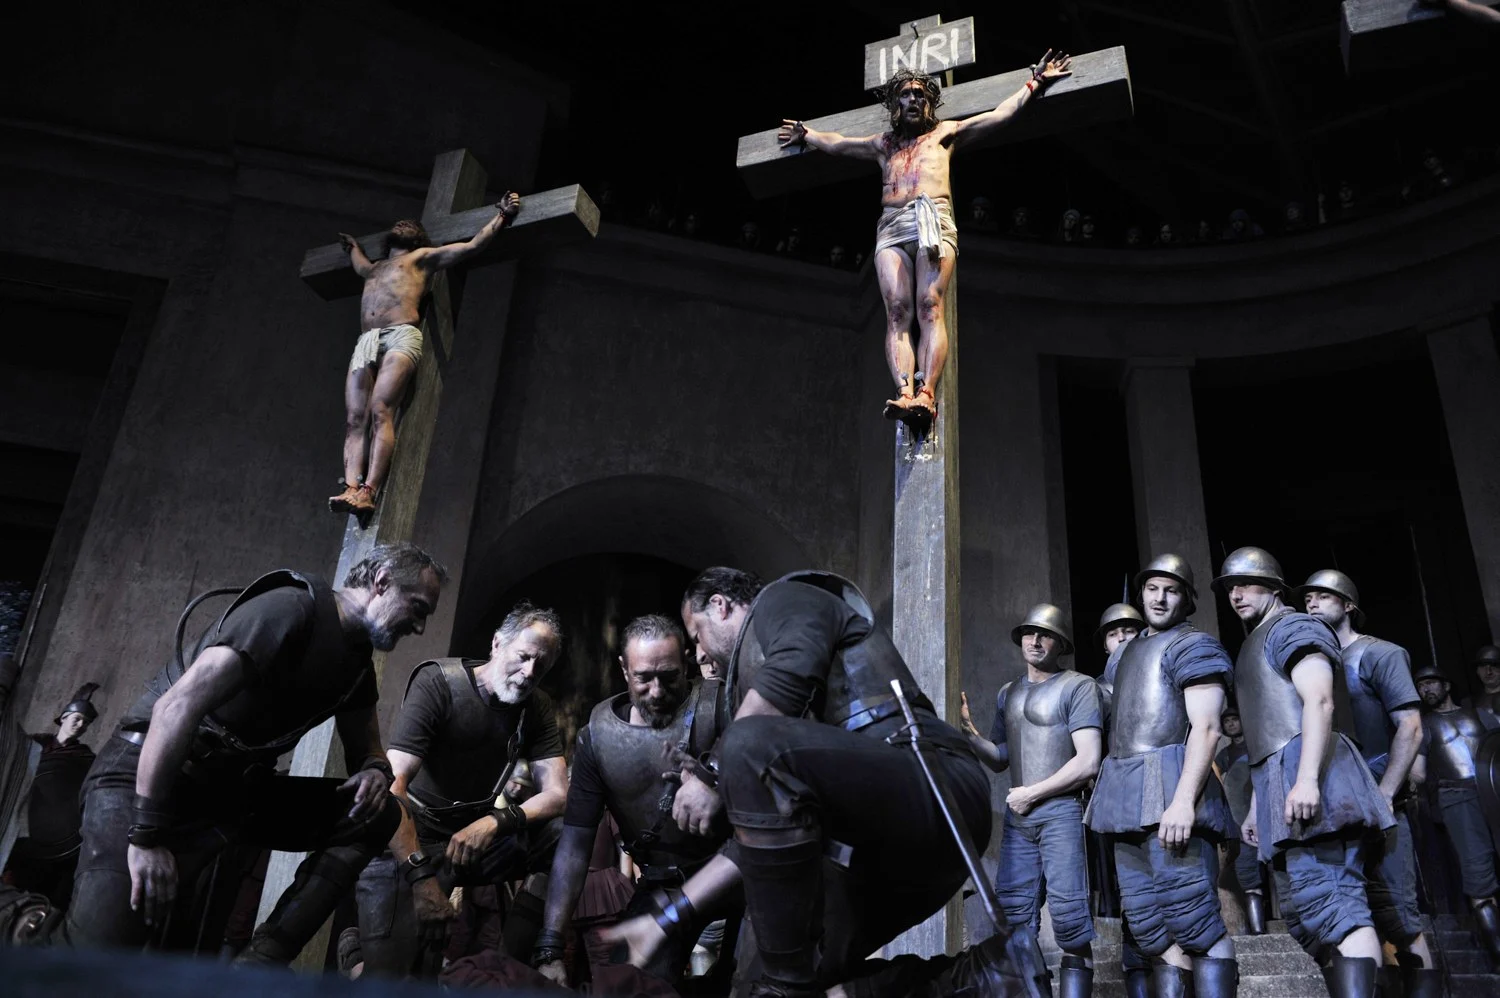 Crucifiction - Oberammergau Passion Play 2020 Photos: Oberammergau Passion Play 2020